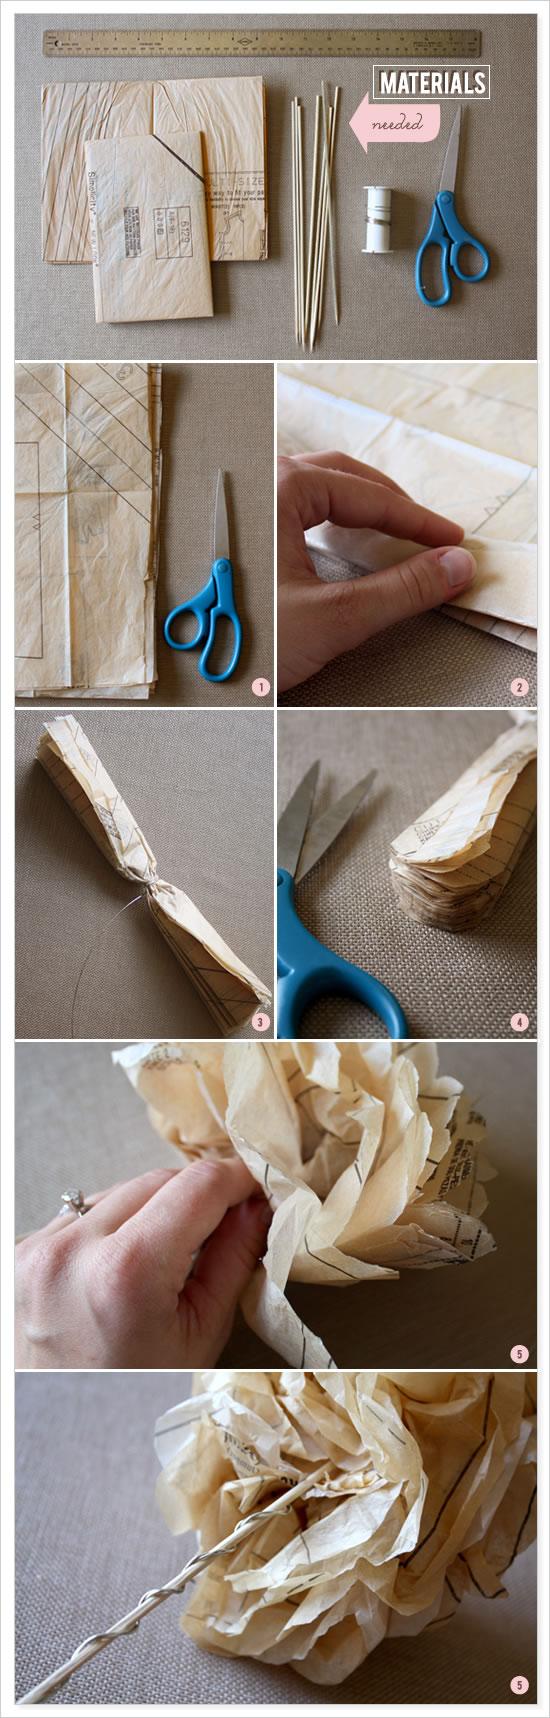 Wedding - How To Make Paper Flowers